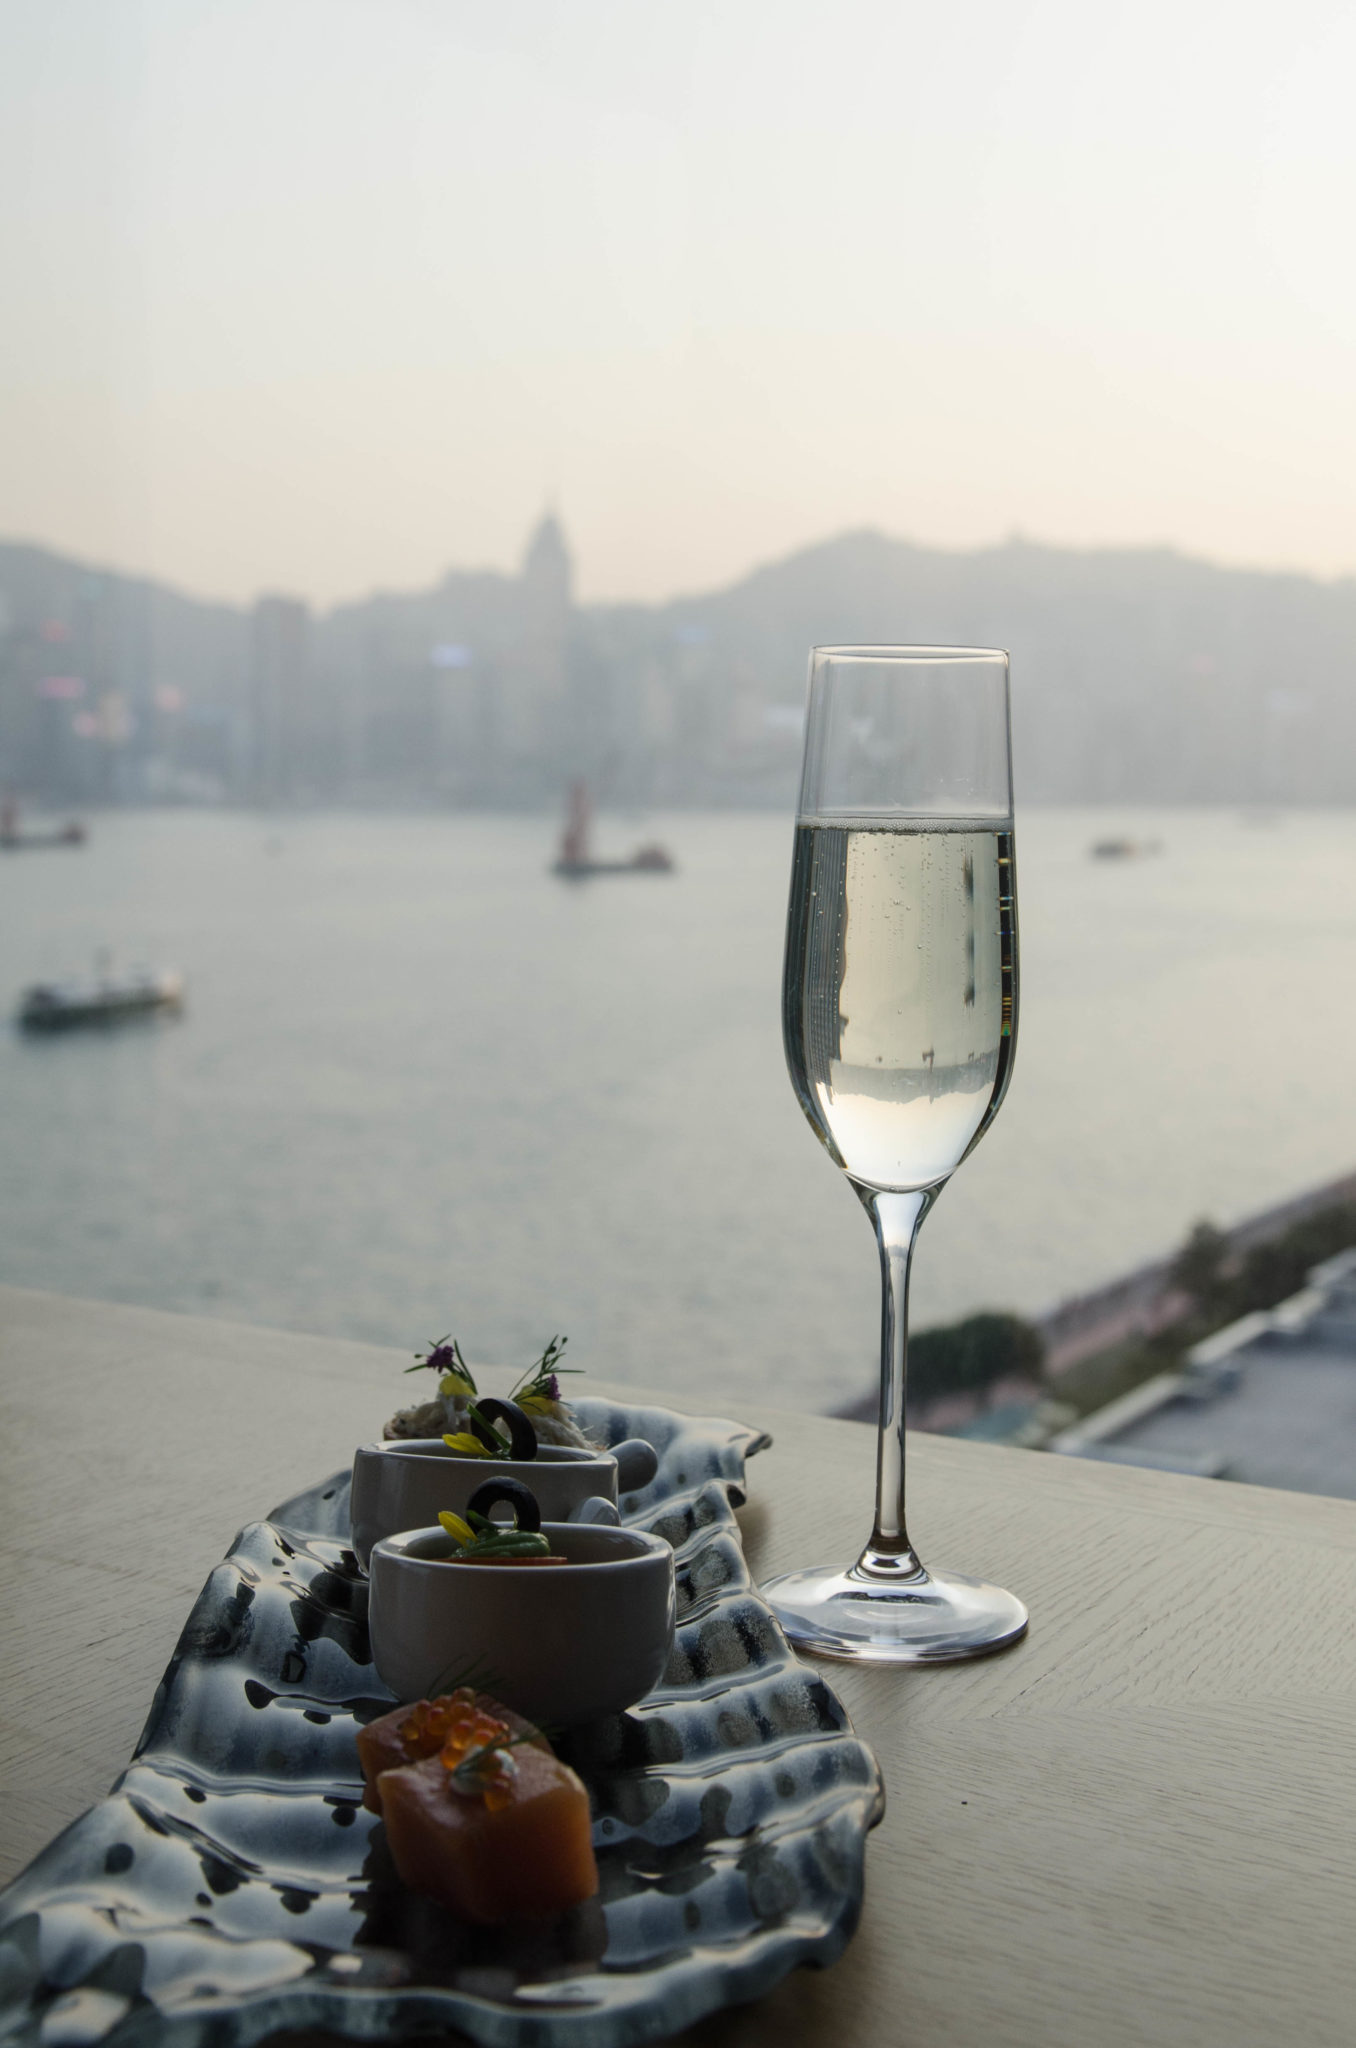 The Kerry Hotel Hong Kong in Hung Hom is located right at the Pearl River.